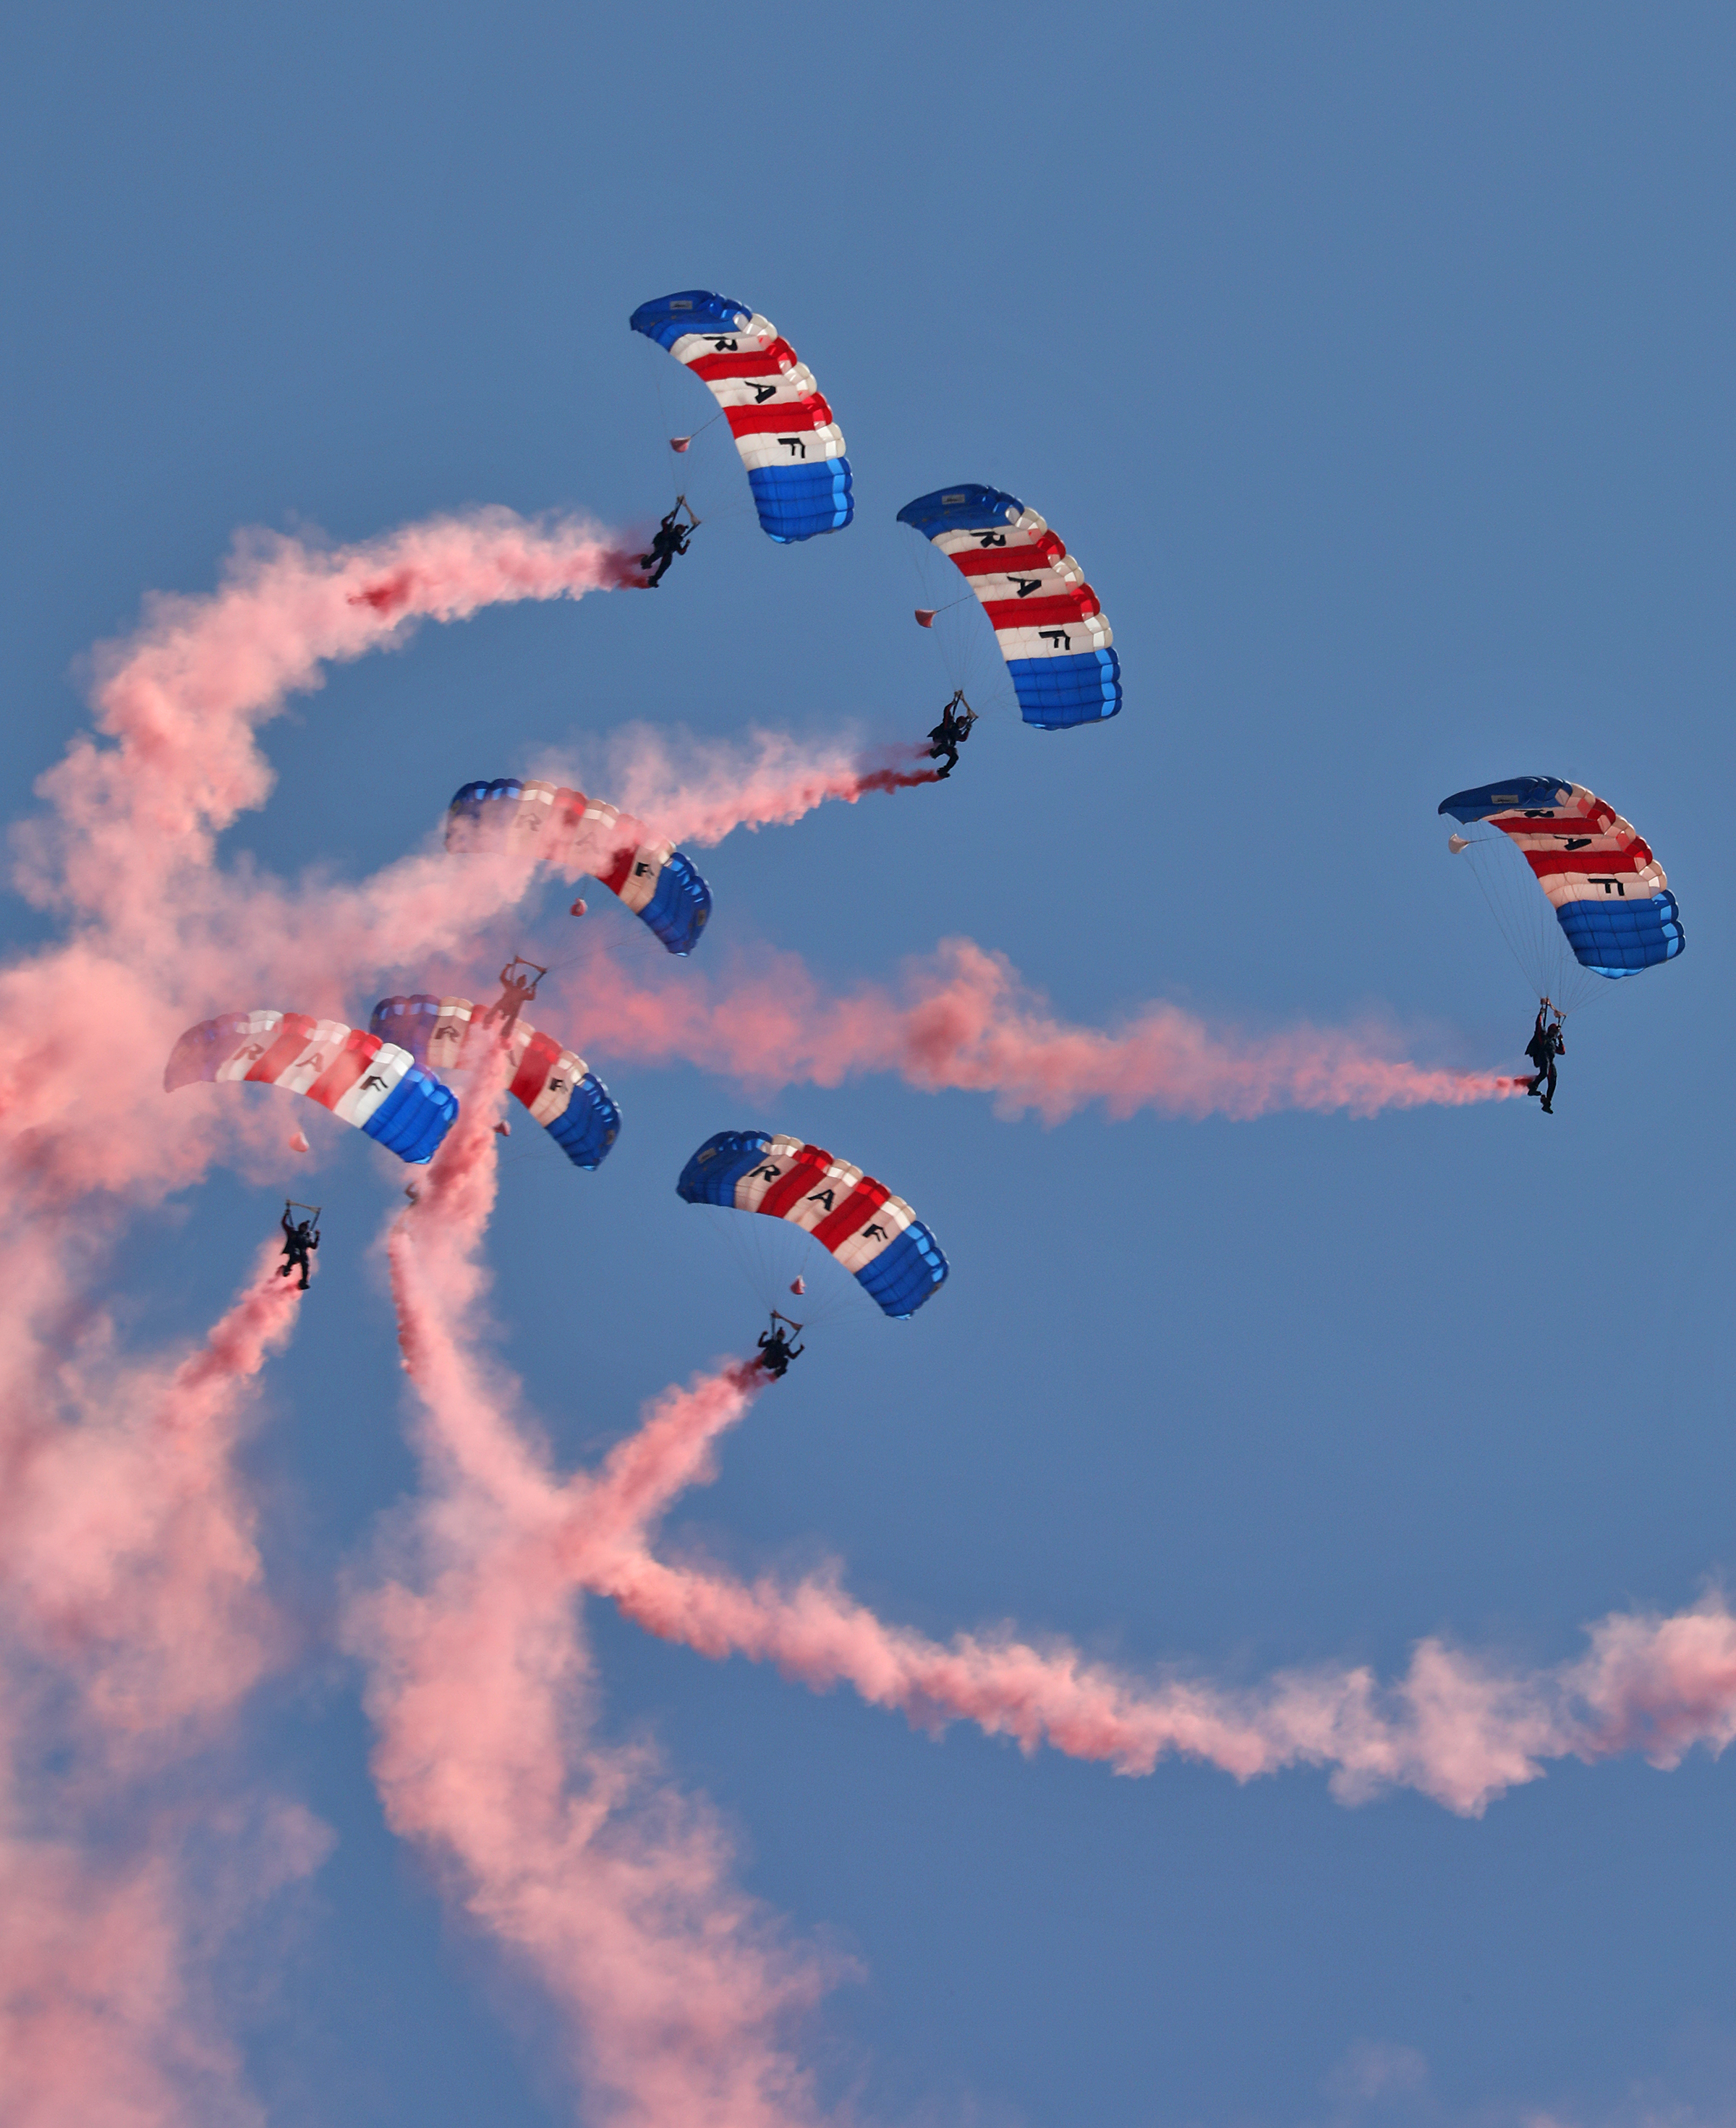 With the Royal Air Force Puma flying high in the sky, the Royal Air Force Falcons Parachute Display Team performed their spectacular aerial display in Cyprus for military personnel and their families based on the island.